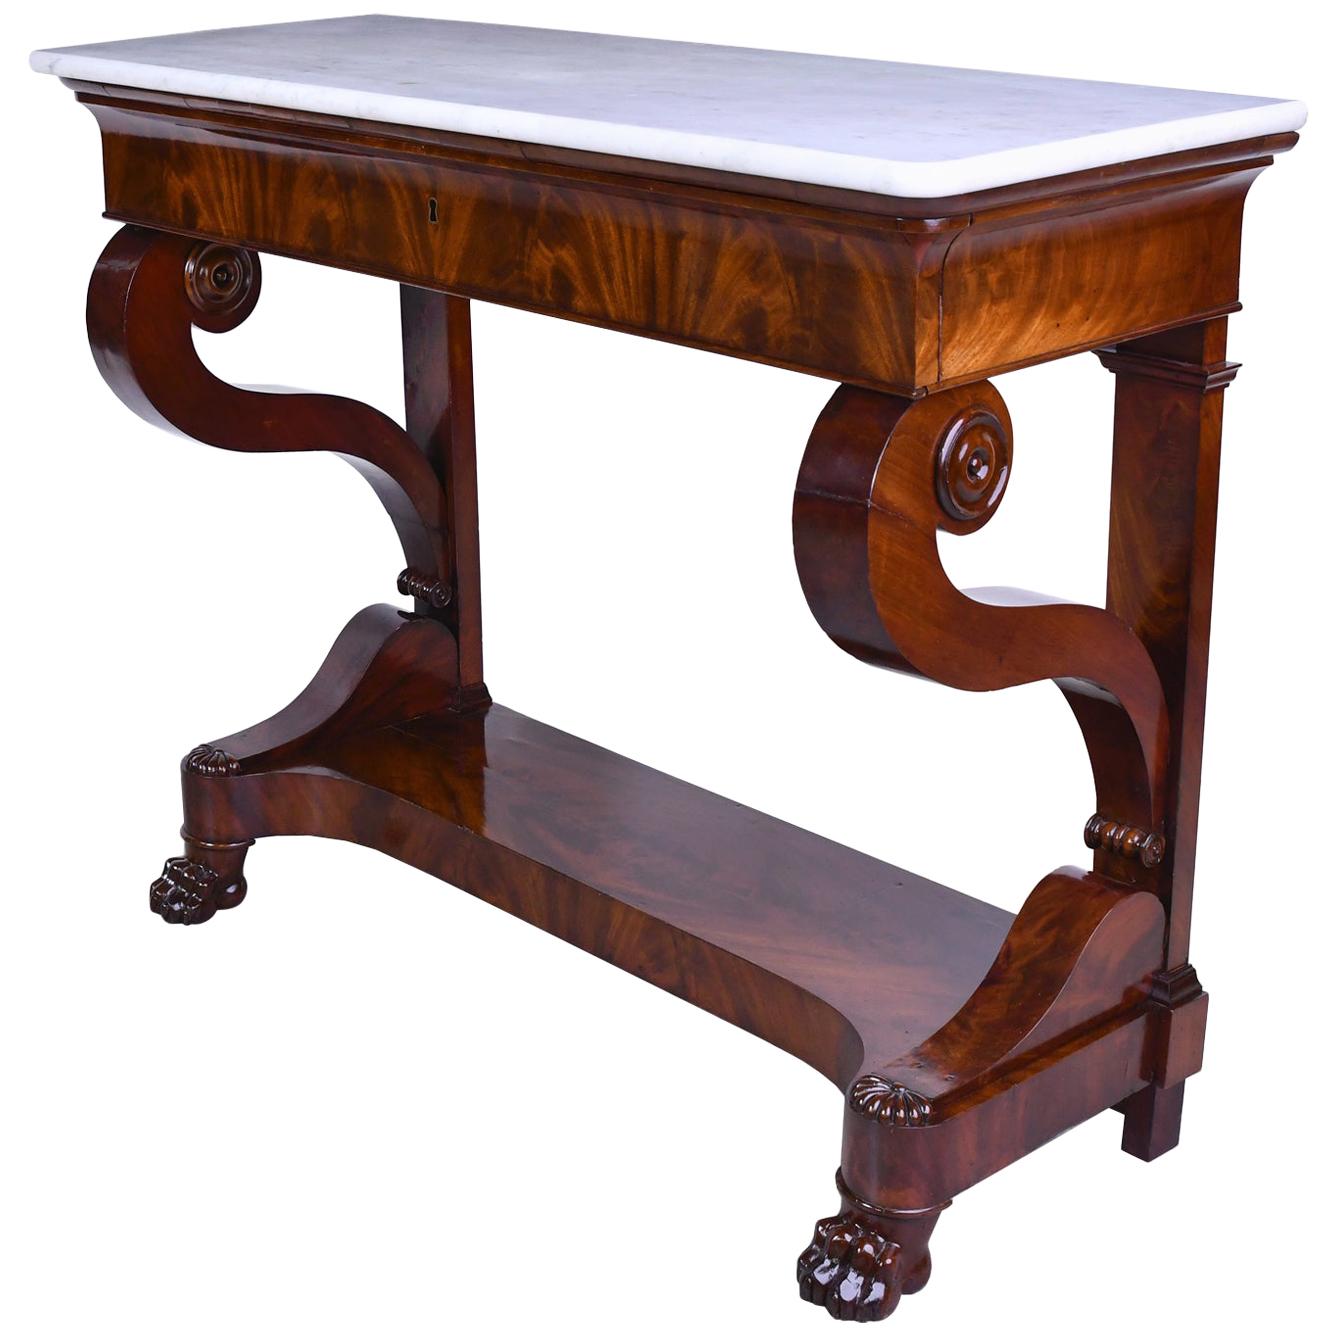 A very handsome French Empire or Charles X console in fine West Indies mahogany with original white marble top. Console has one long drawer along the apron, graceful 